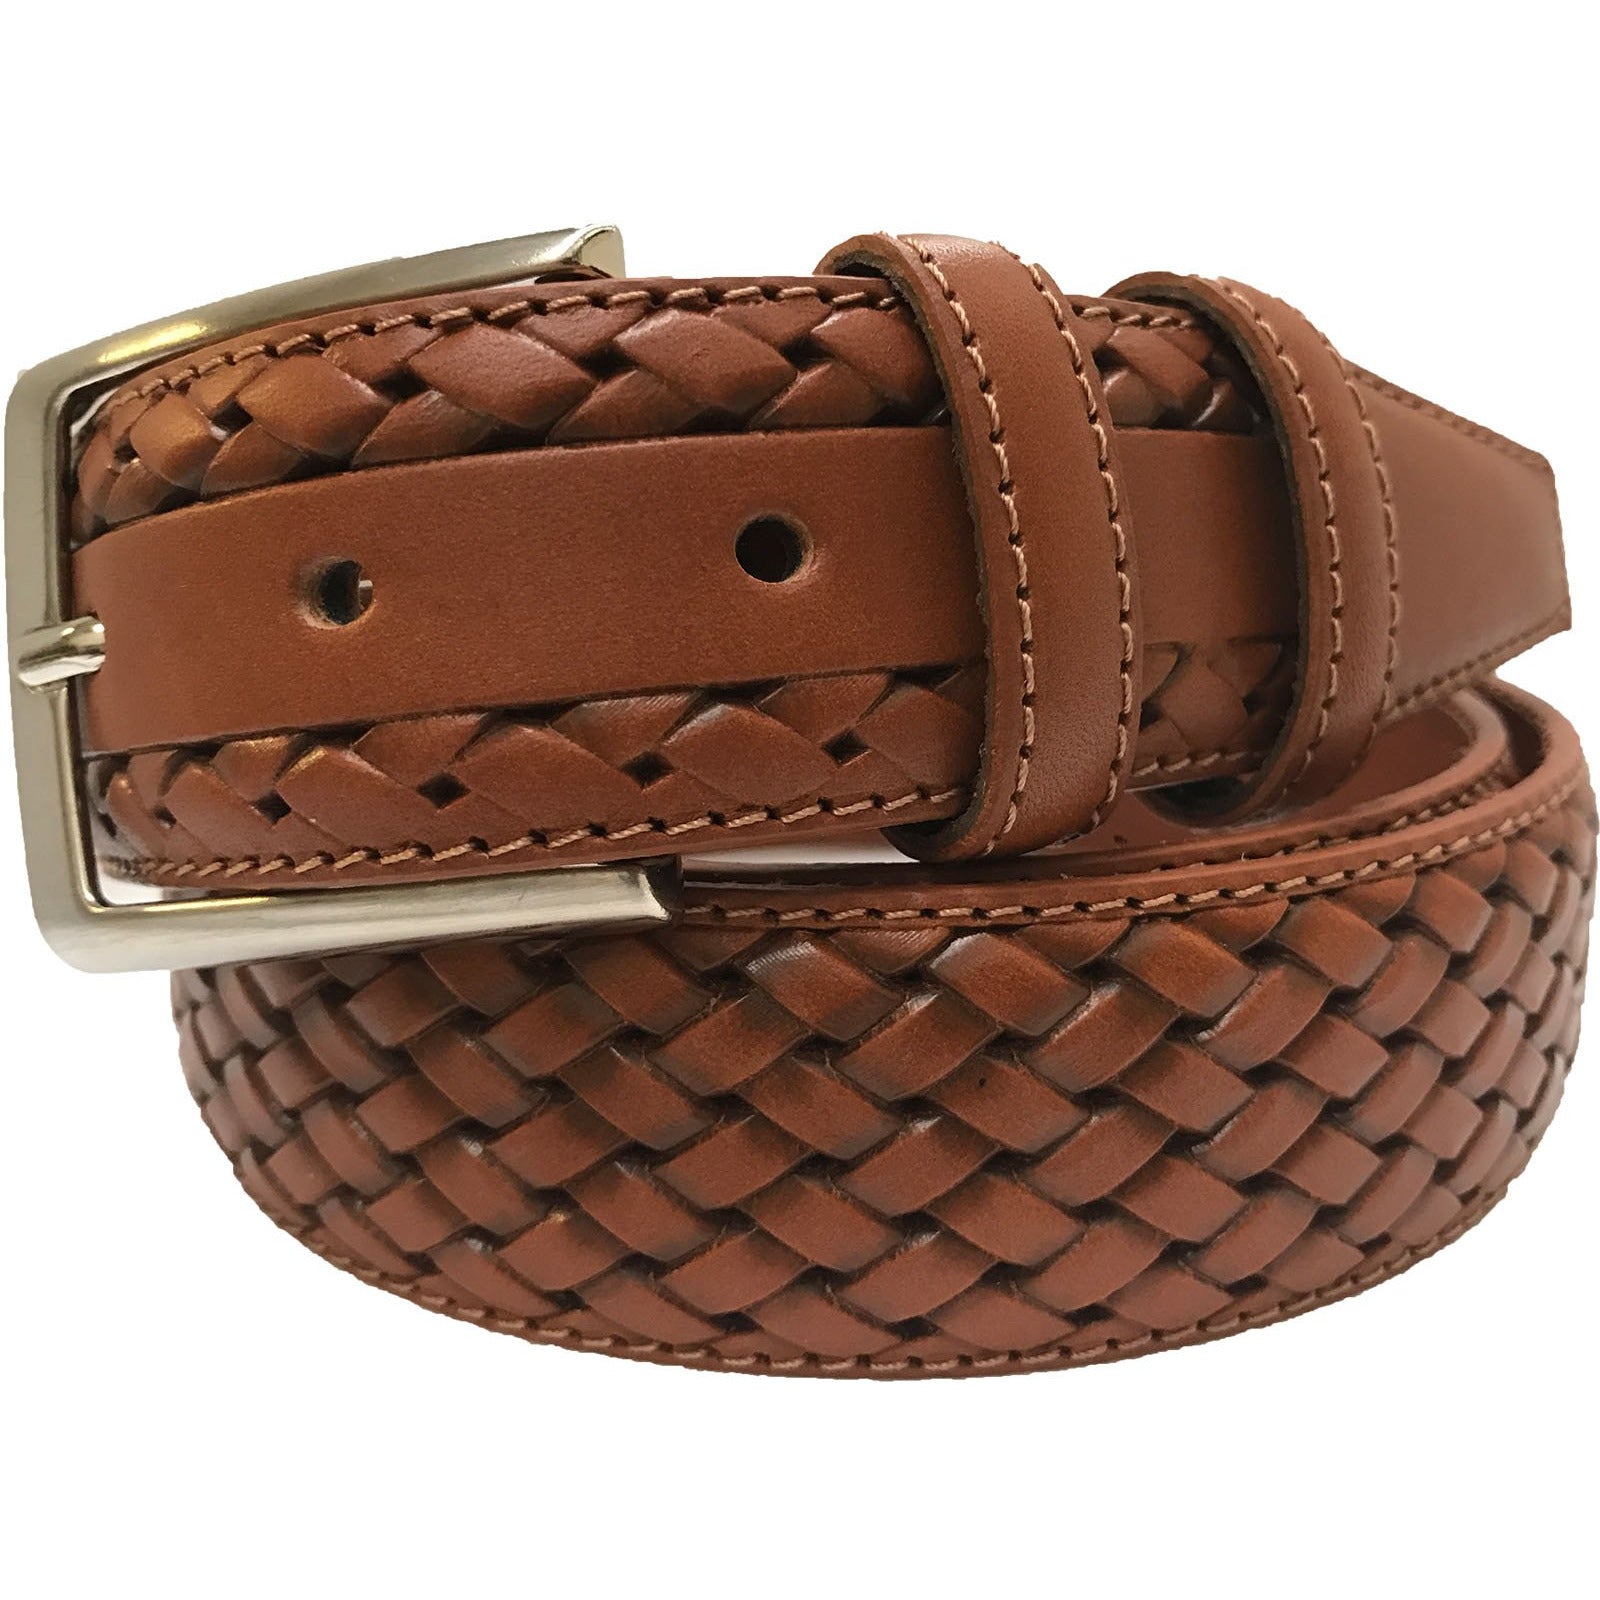 TOBACCO CALF LEATHER WEAVE EMBOSSED 35MM LEATHER BELT